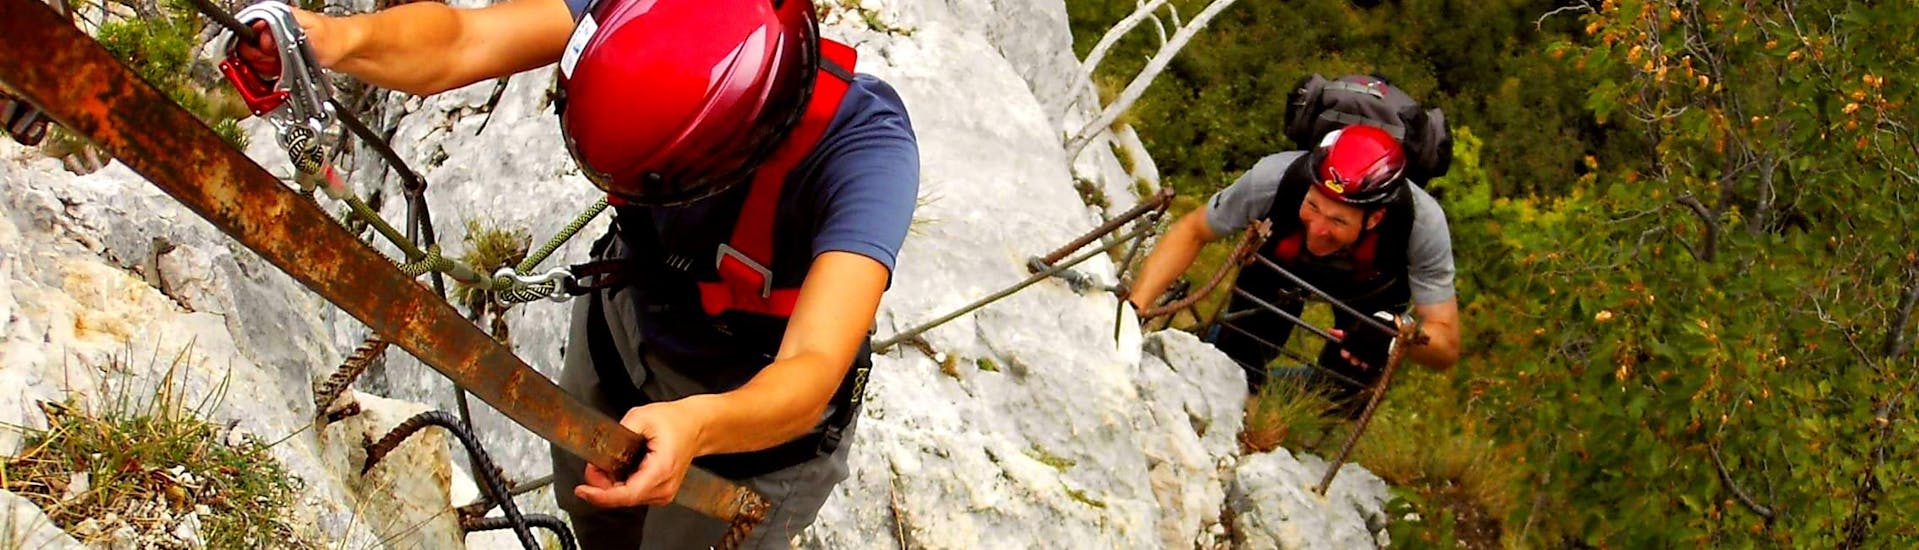 Two participants in the Via Ferrata Via dell'Amicizia organized by Skyclimber proceed in the direction of the photographer.